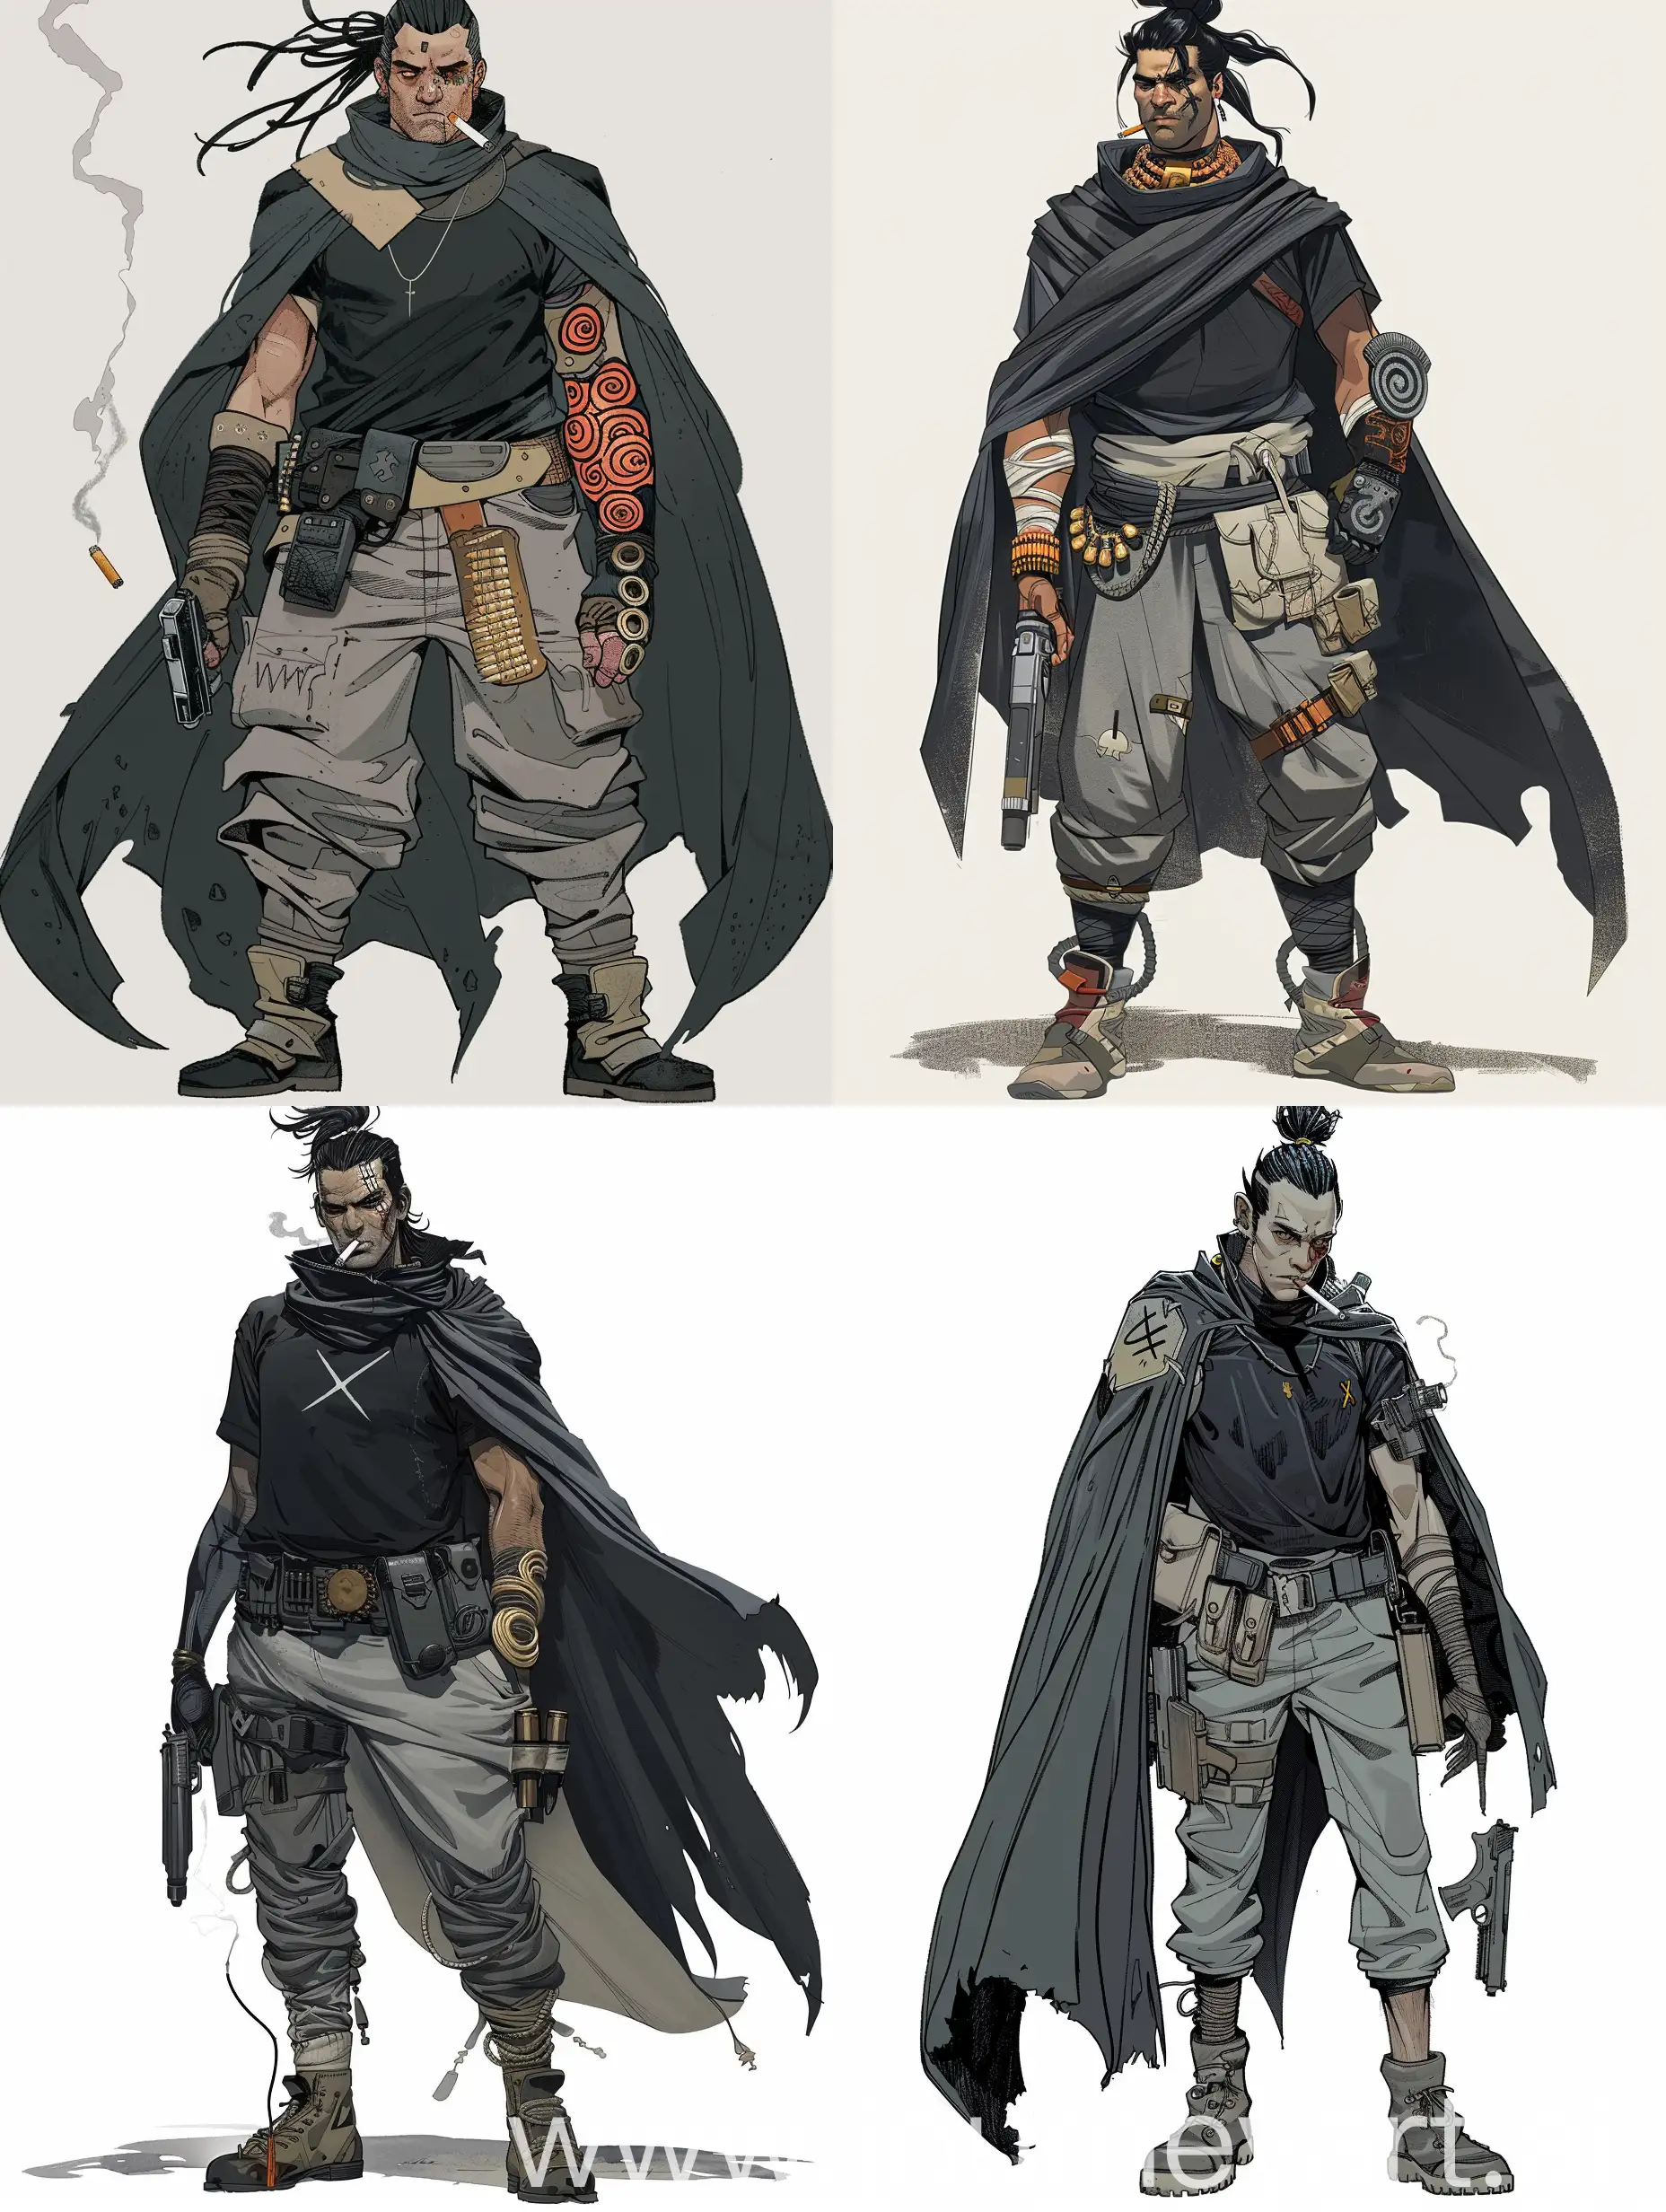 Mysterious-BlackHaired-Gunslinger-with-Xshaped-Scar-and-Spiralpatterned-Cape